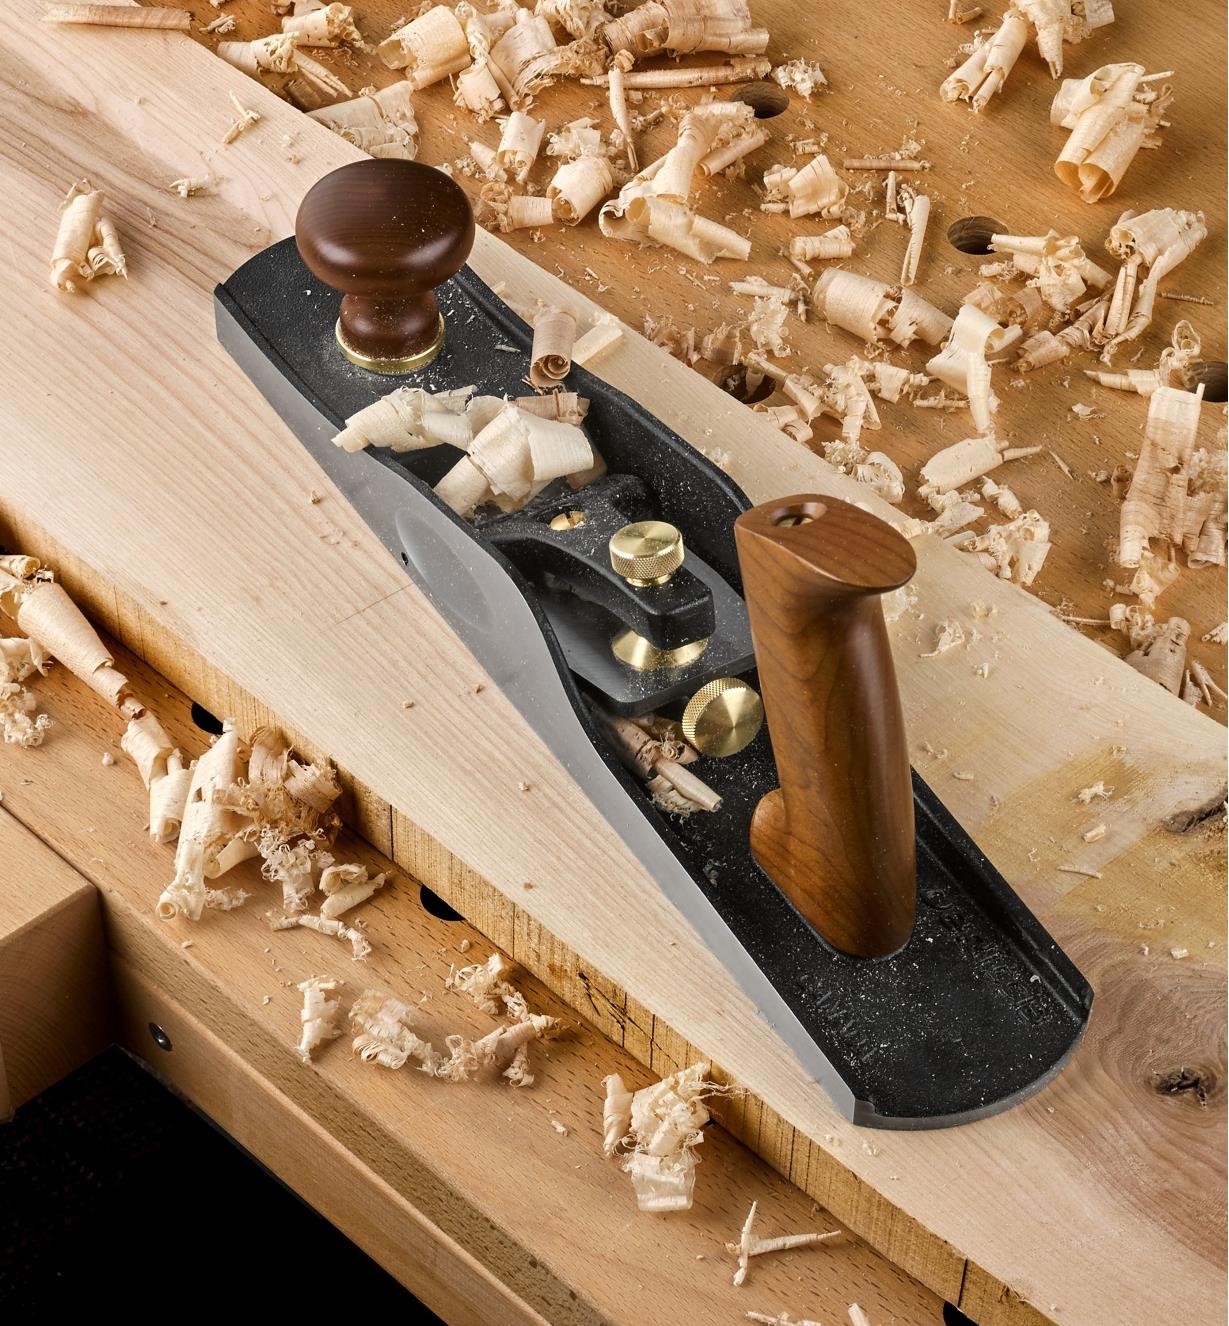 Veritas Low-Angle Jack Plane sitting on a board surrounded by wood shavings